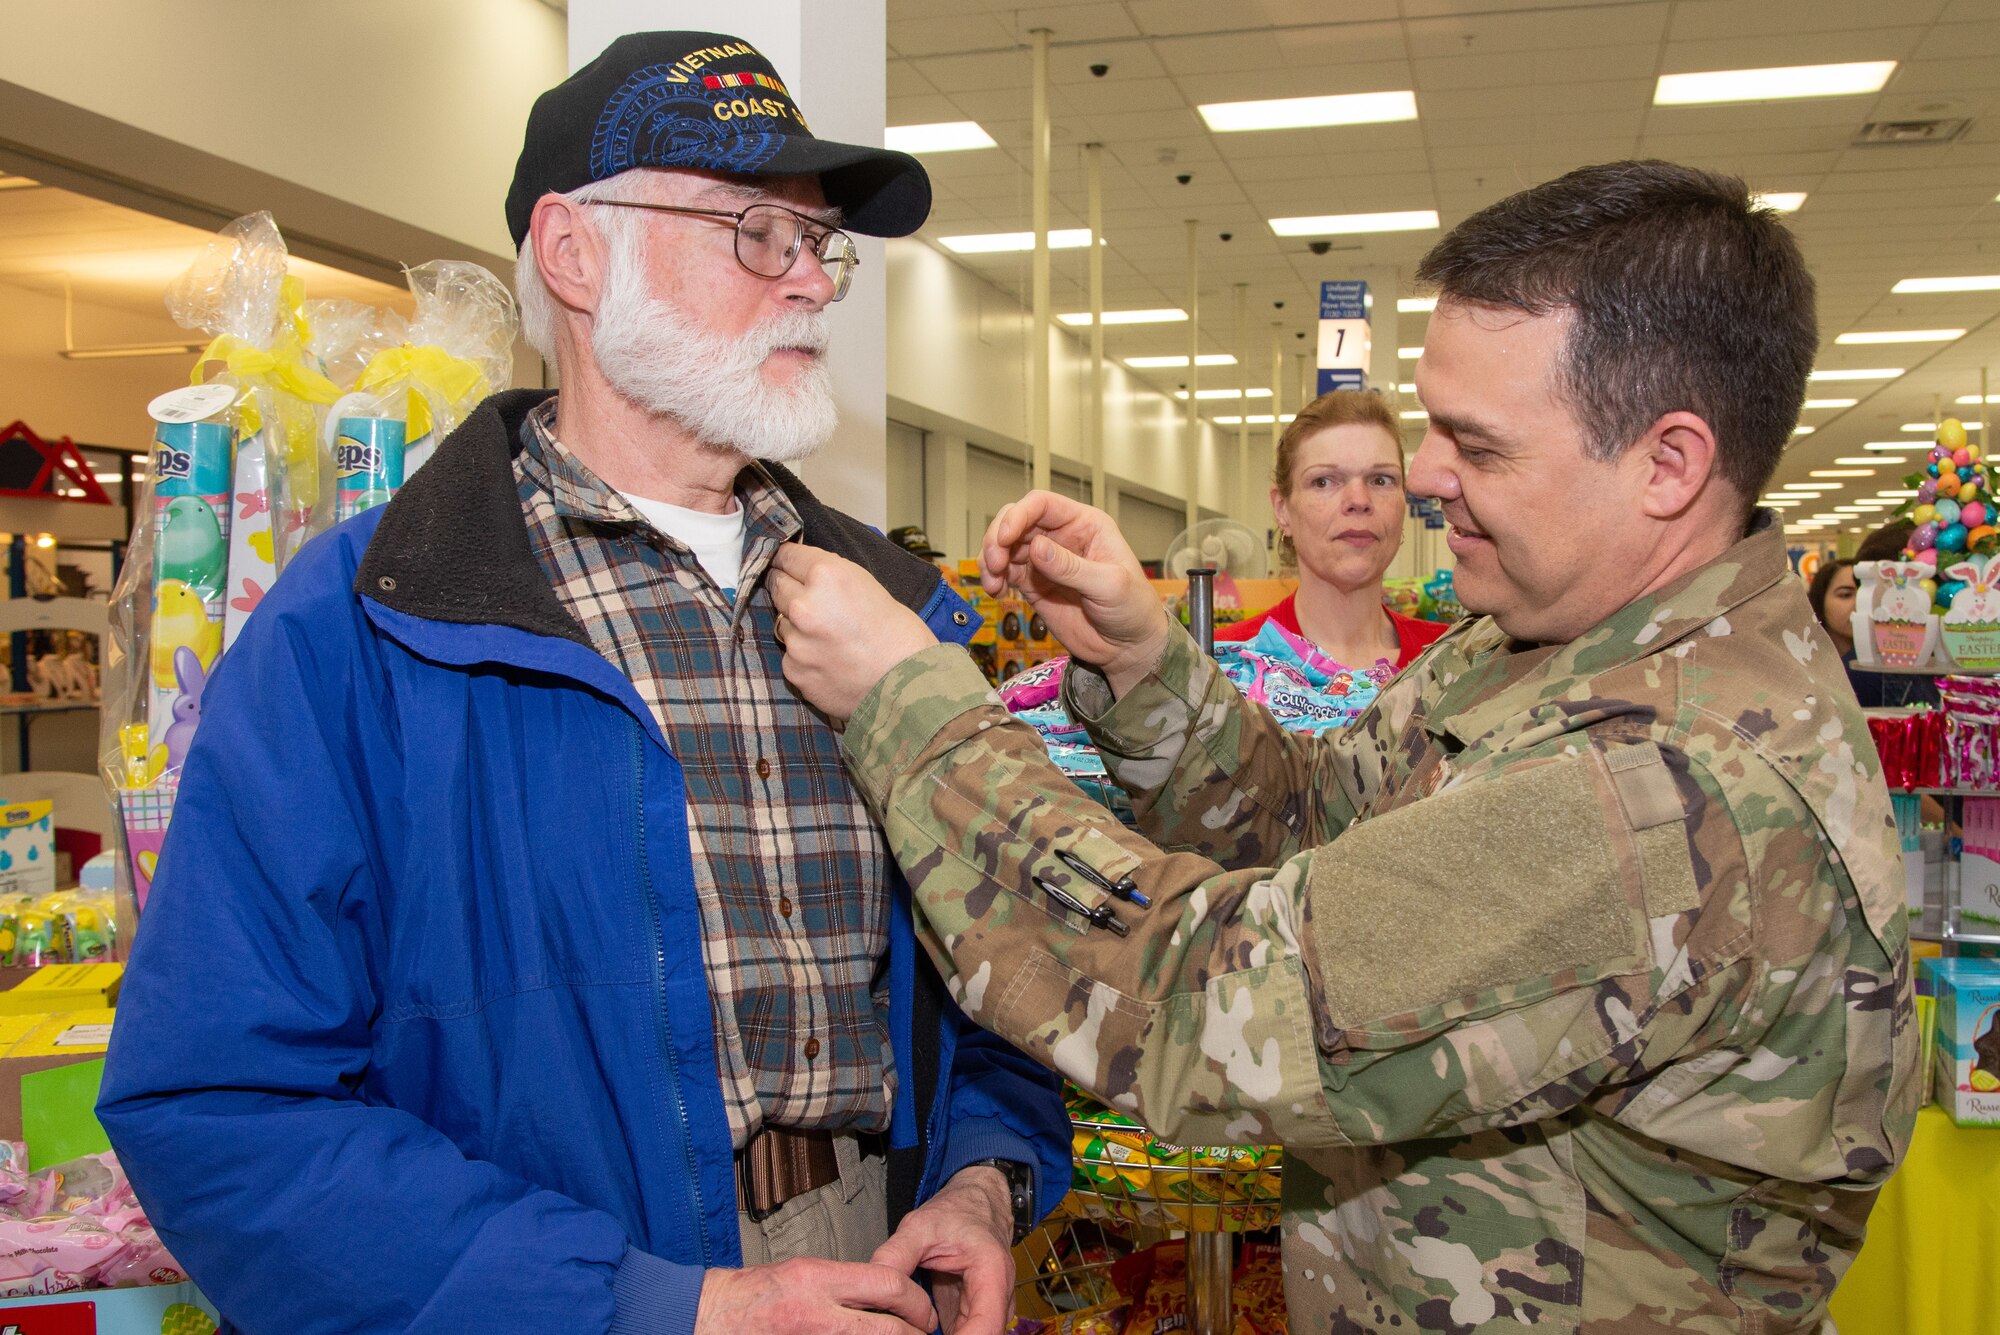 Colonel Gabe Lopez, 75th Mission Support Group commander, pins Mike Glenn, U.S. Coast Guard veteran, with a Vietnam Veteran Pin March 29 2019, at the Main Exchange at Hill Air Force Base, Utah. Base Exchanges around the world hosted pinning ceremonies to honor Vietnam veterans on Vietnam Veterans Day. Vietnam Veterans Day is celebrated every March 29 to honor the courage and sacrifice of those who served in the Vietnam War. (U.S. Air Force photo by Cynthia Griggs)